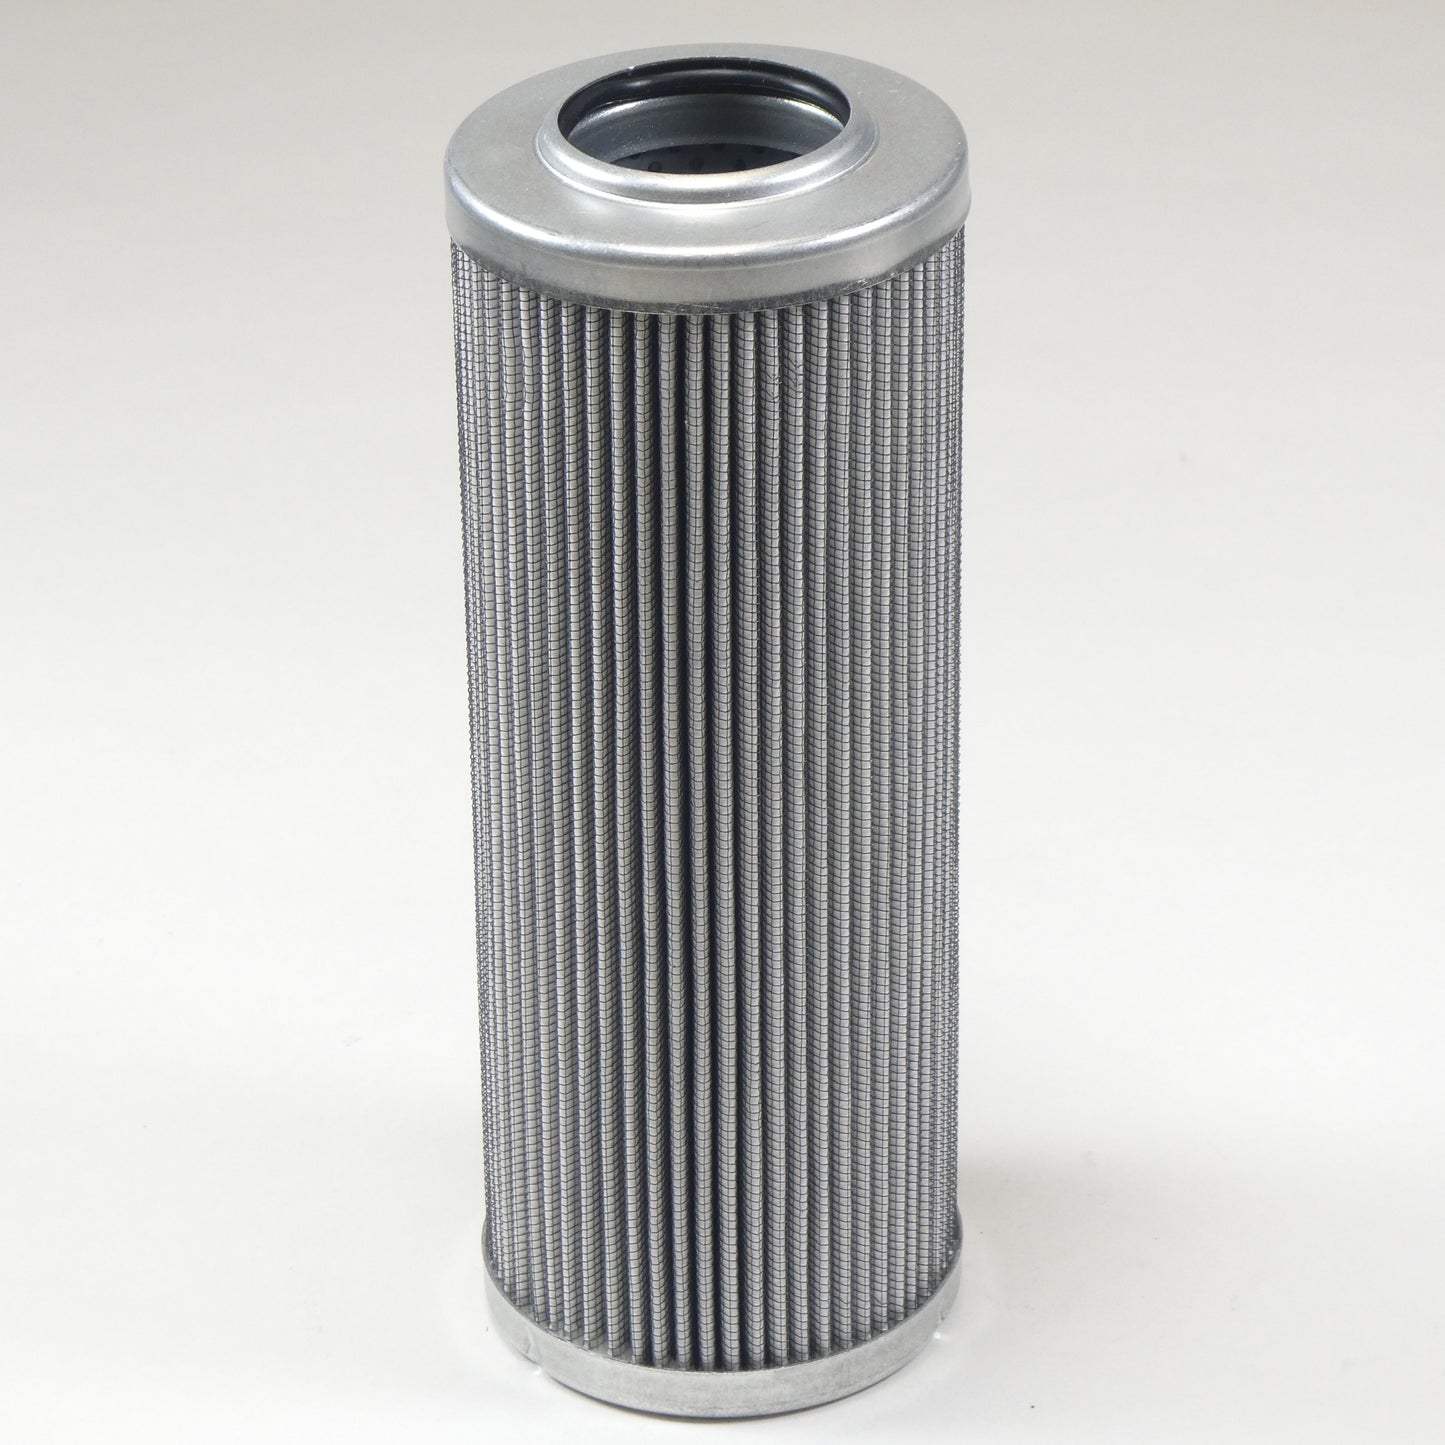 Hydrafil Replacement Filter Element for Hilco 3830-14-028-C